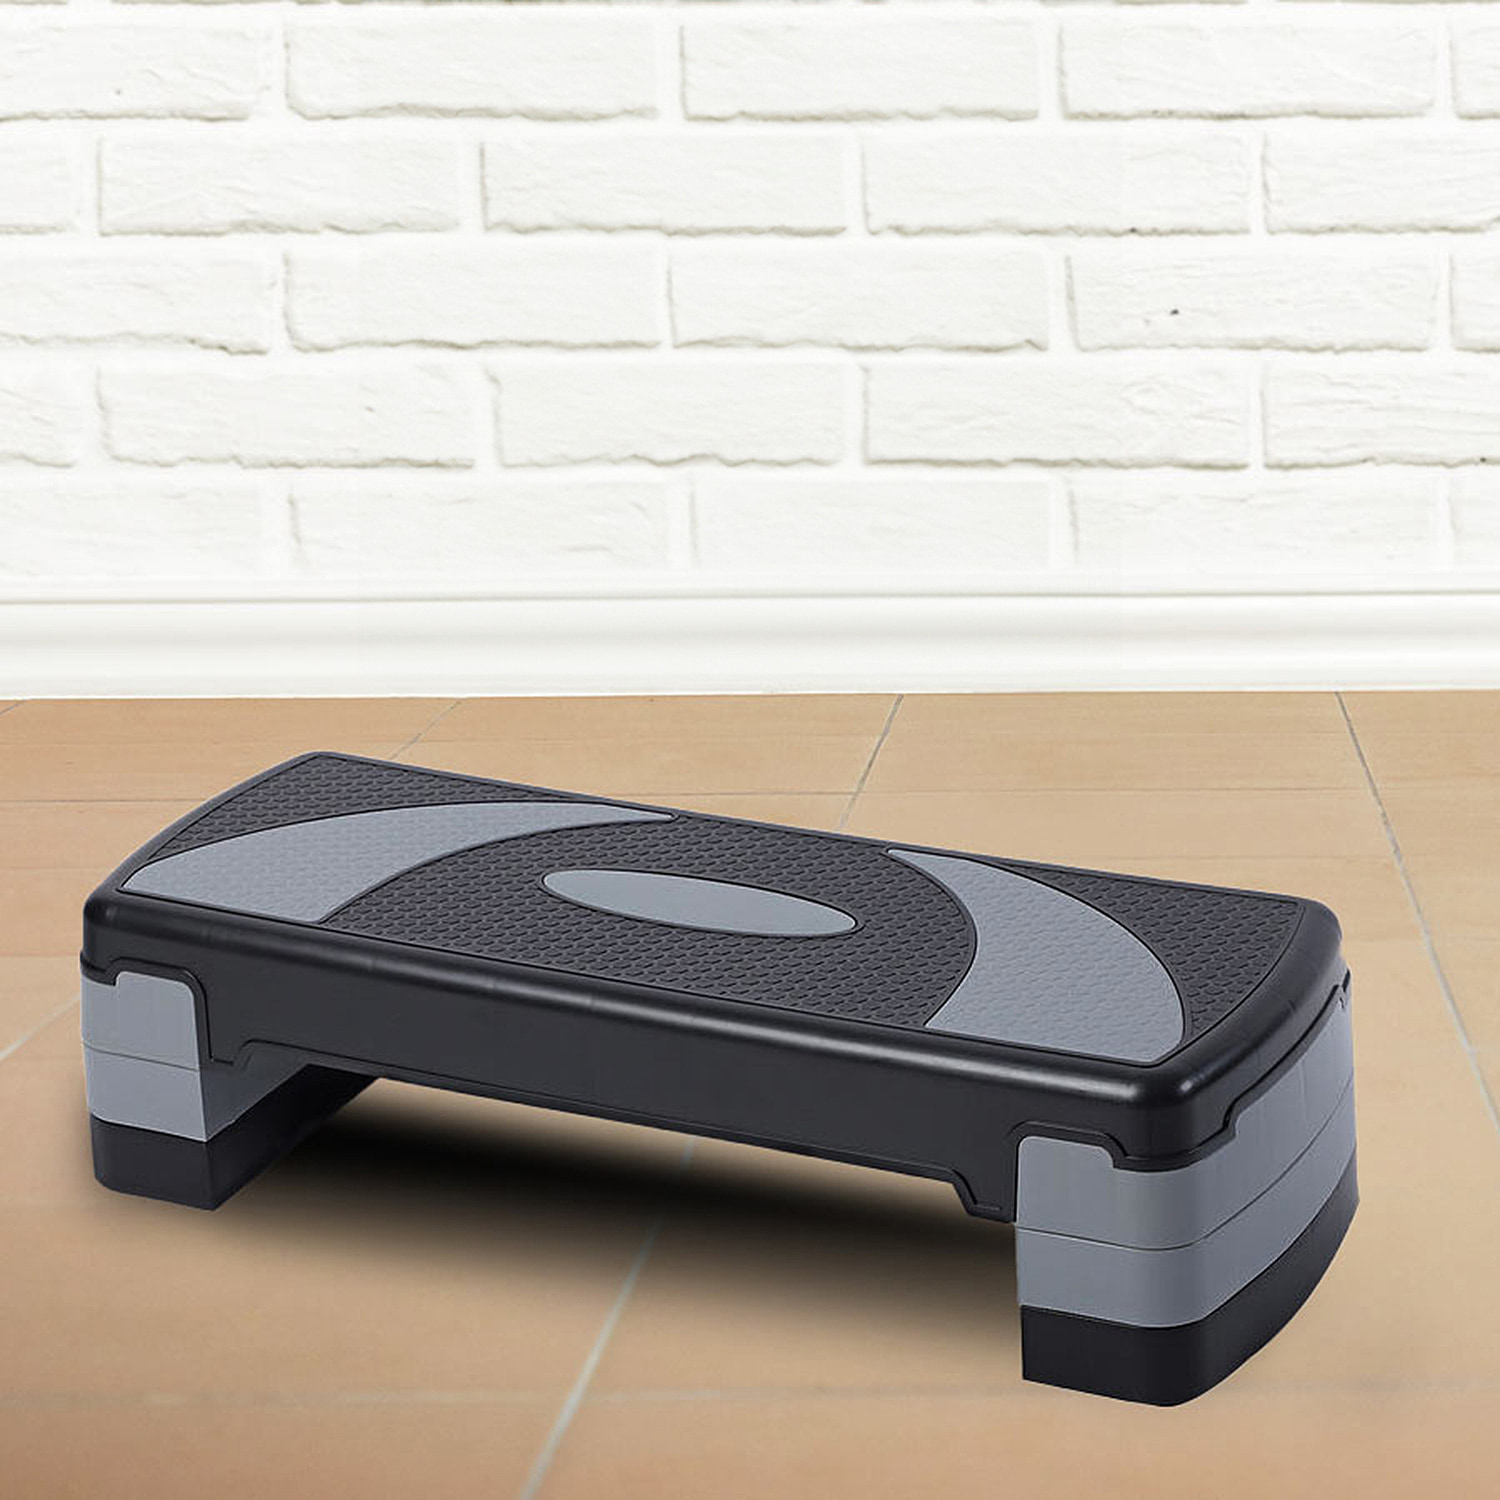 Fitness-Aerobic-Stepper-Board--Black-and-Grey